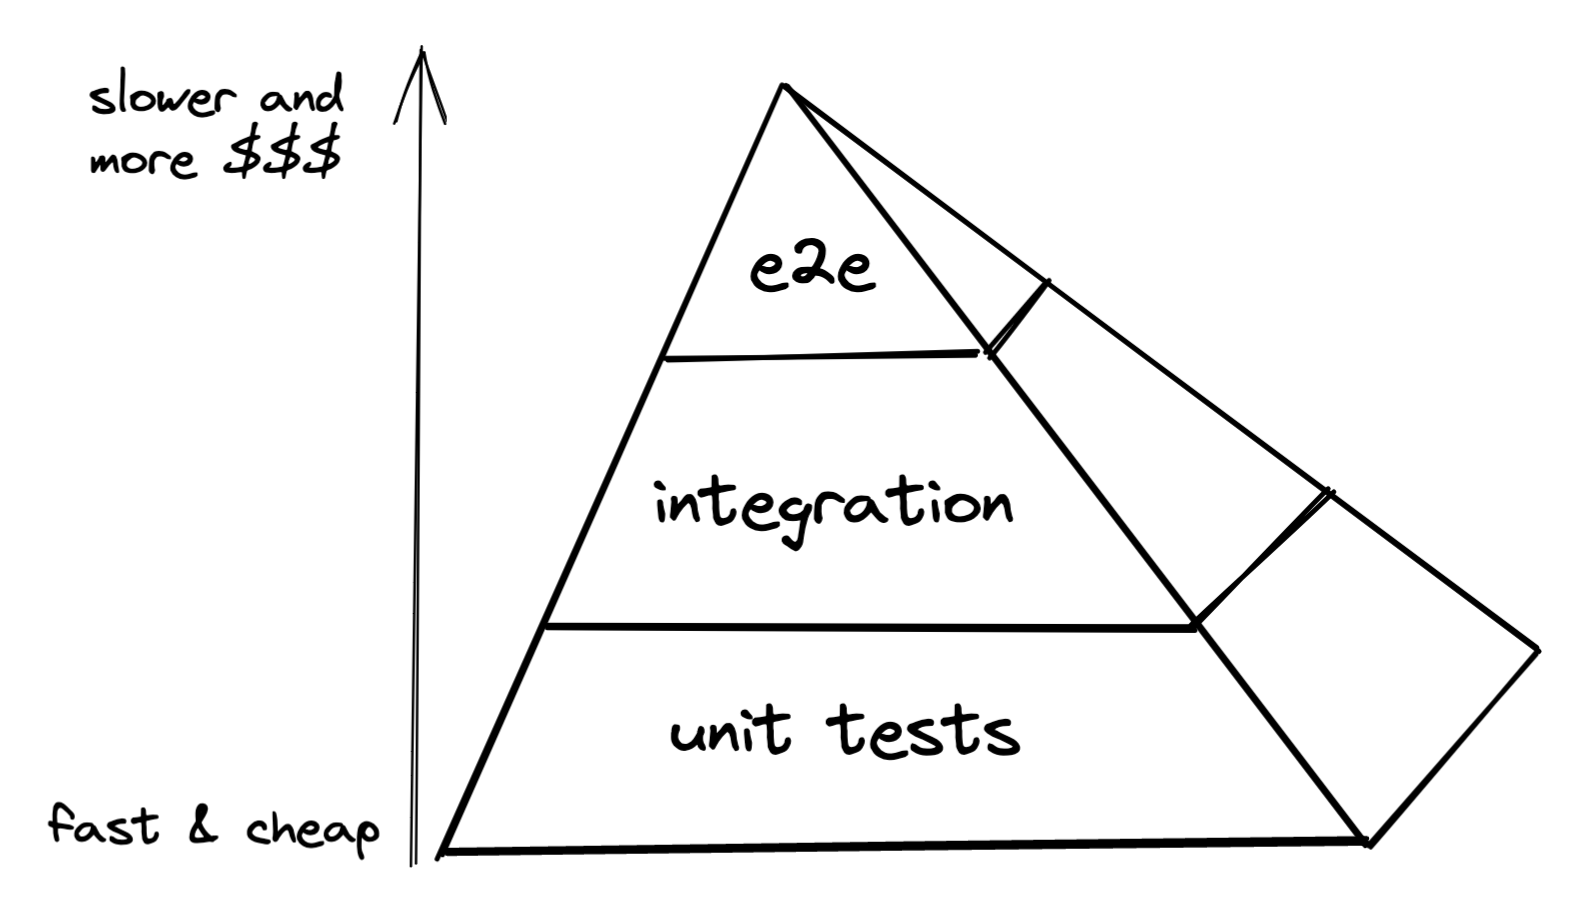 A pyramid with three layers: e2e (top), integration (mid), and unit tests (bottom). Caption implies the top is expensive and slow, and the bottom is fast and cheap.